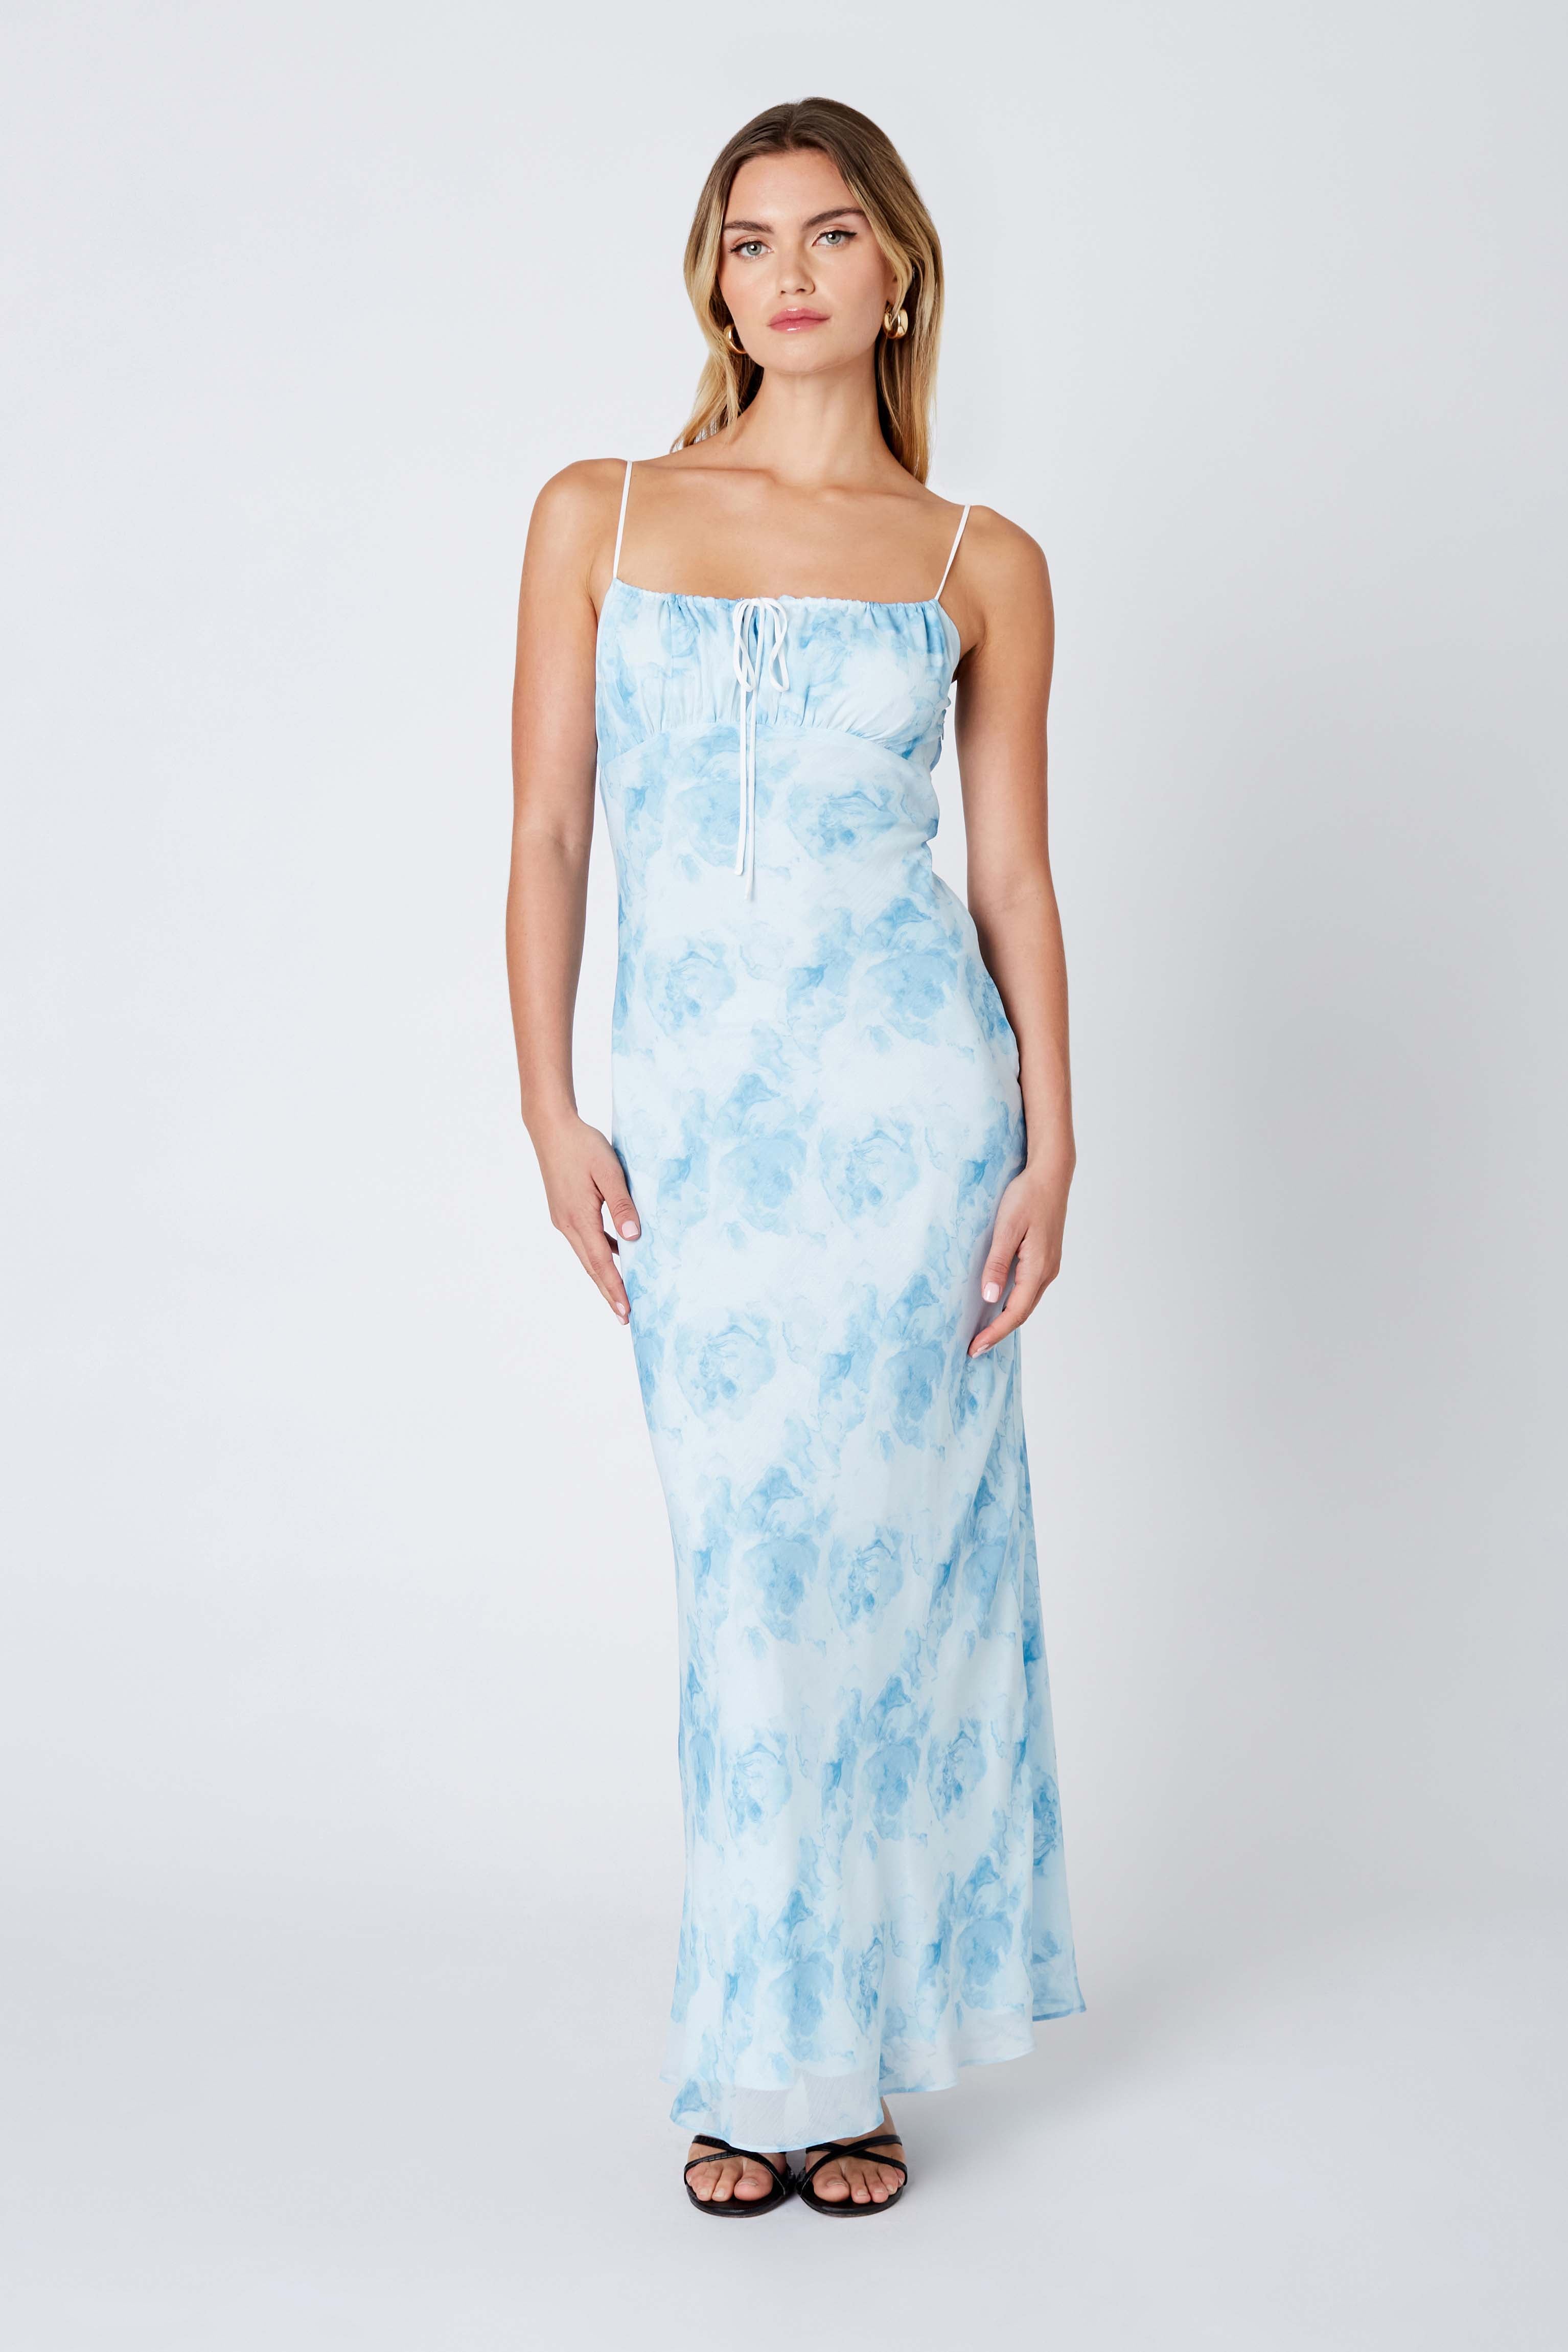 Floral Maxi Dress in Powder Blue Front View